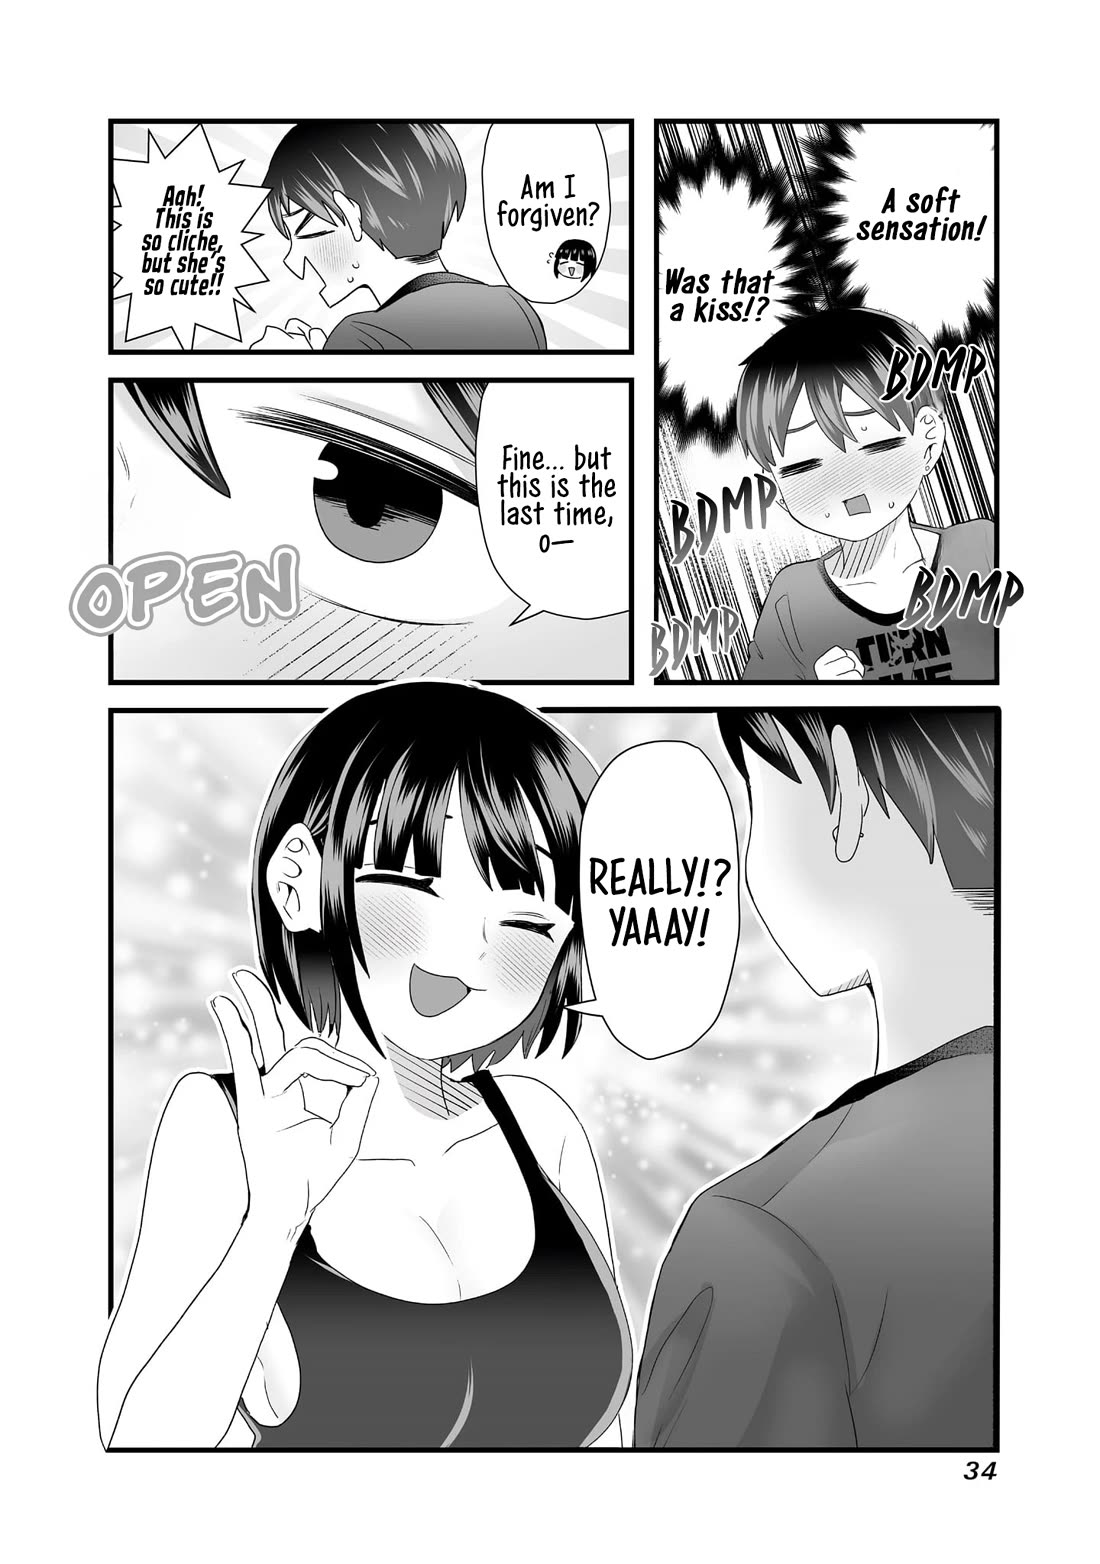 Sacchan and Ken-chan Are Going at it Again - chapter 4 - #6